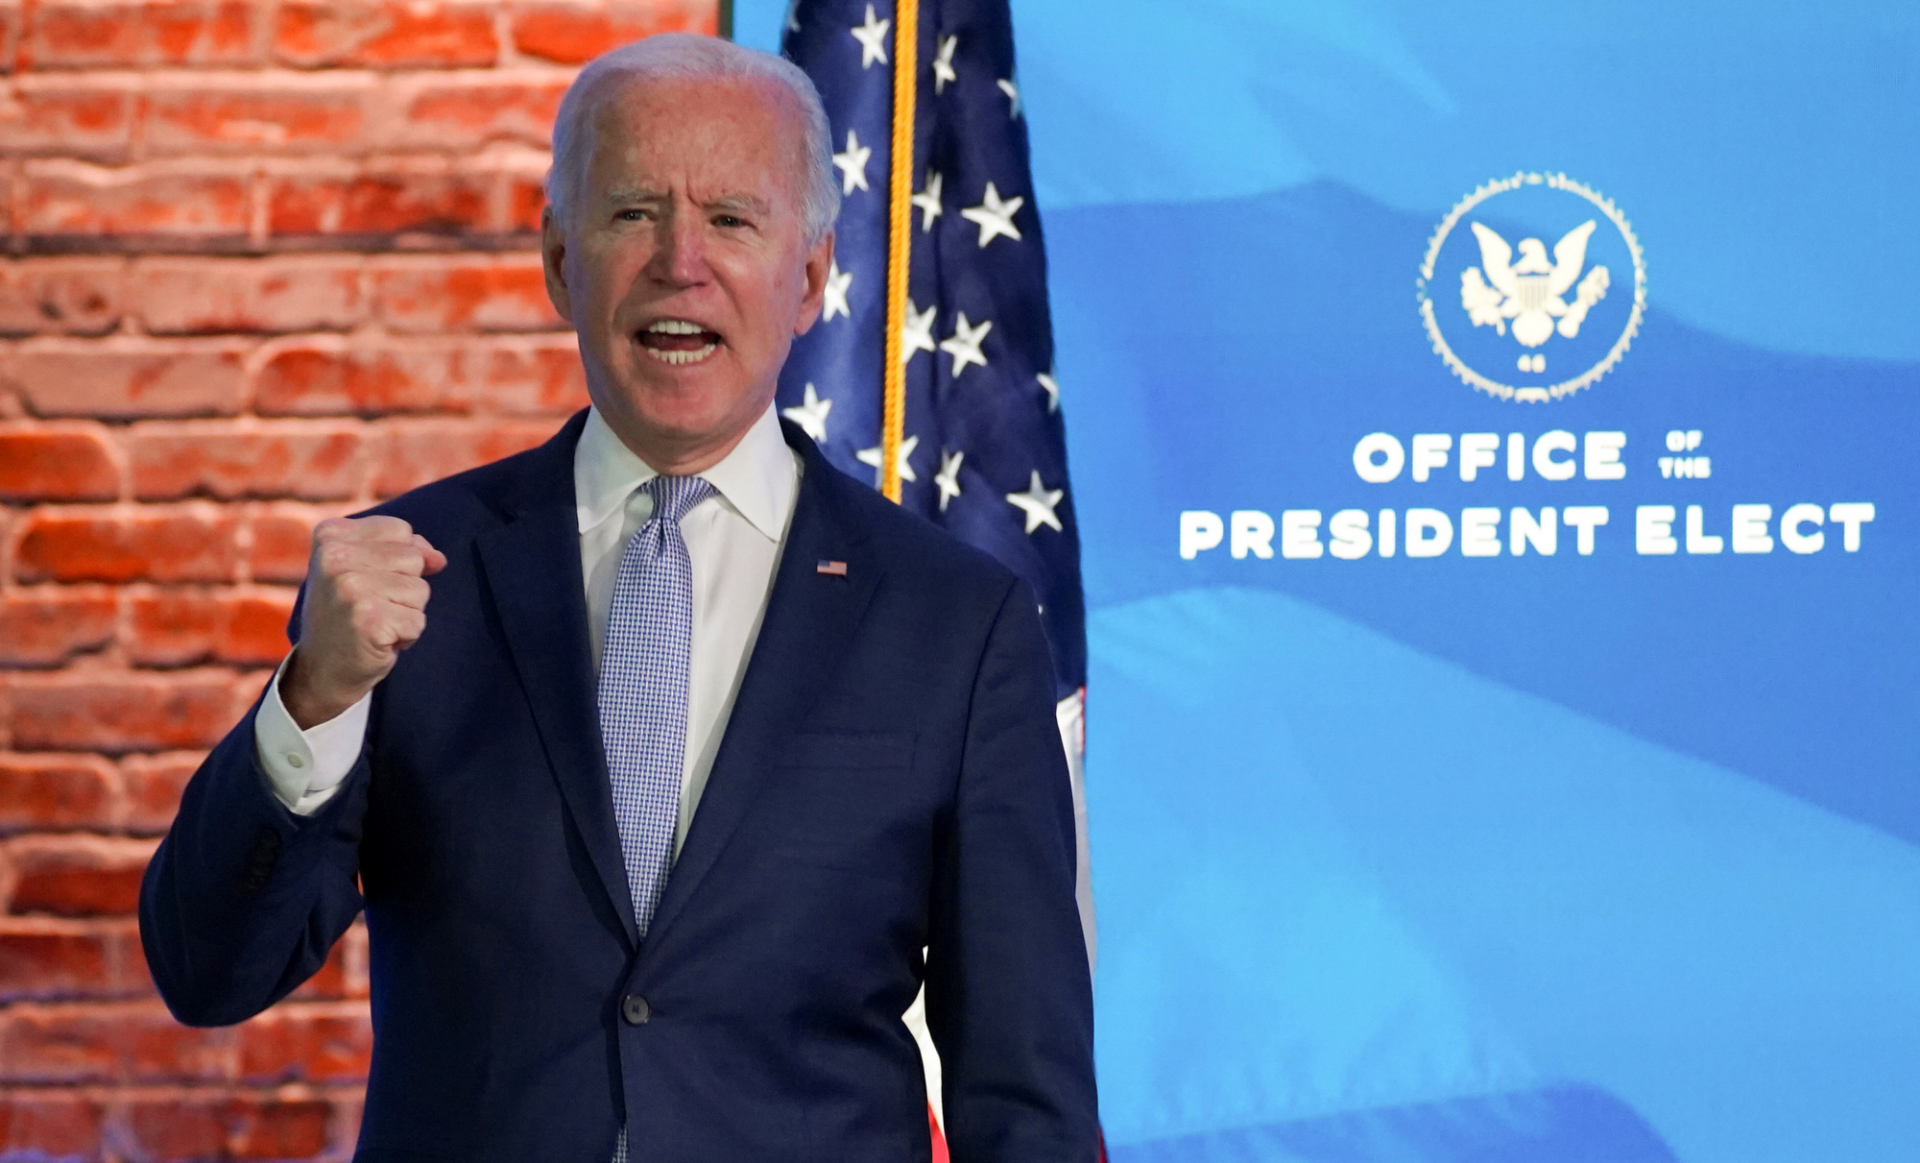 Biden is certified victory by US Congress; Trump pledges 'Orderly Transition' on Jan 20